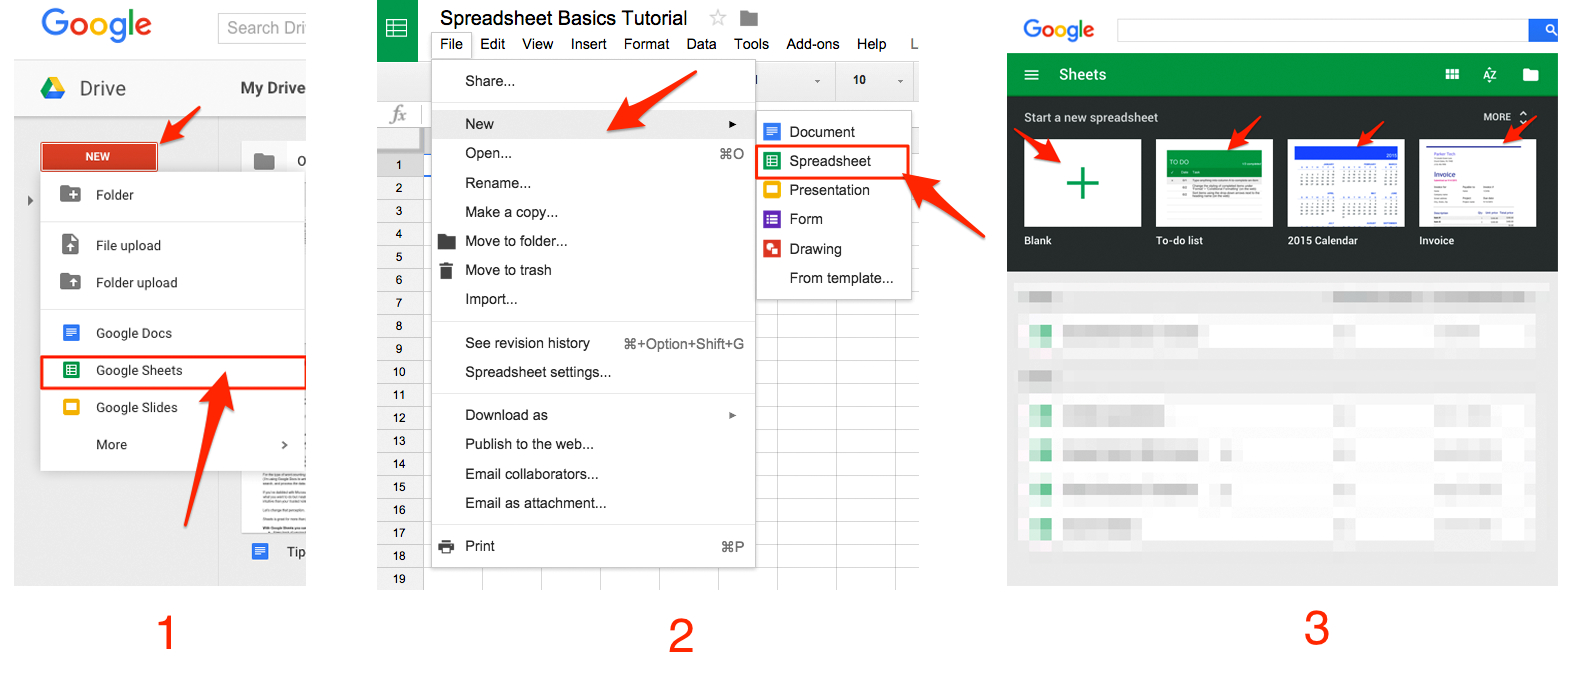 Document Spreadsheet For Google Sheets 101: The Beginner's Guide To Online Spreadsheets  The